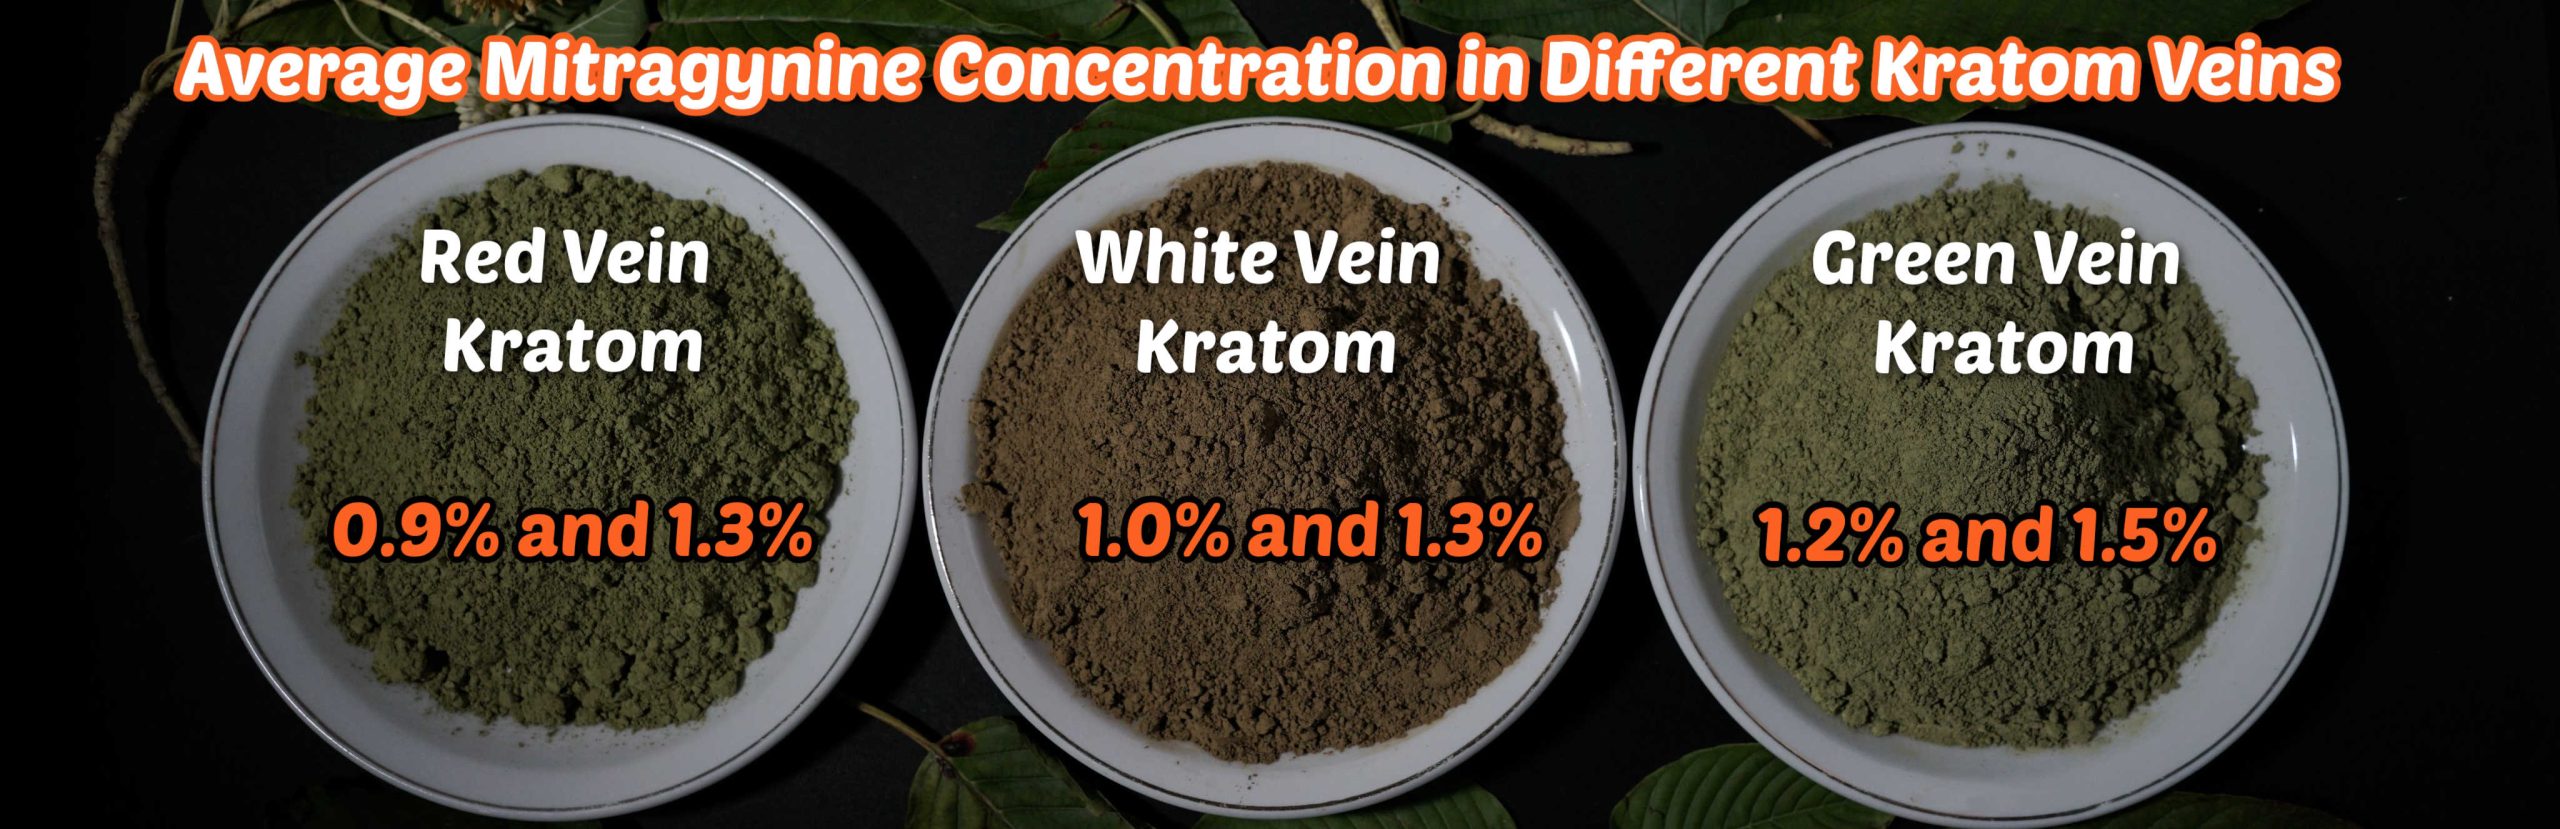 How Much Mitragynine Content Is in Kratom?